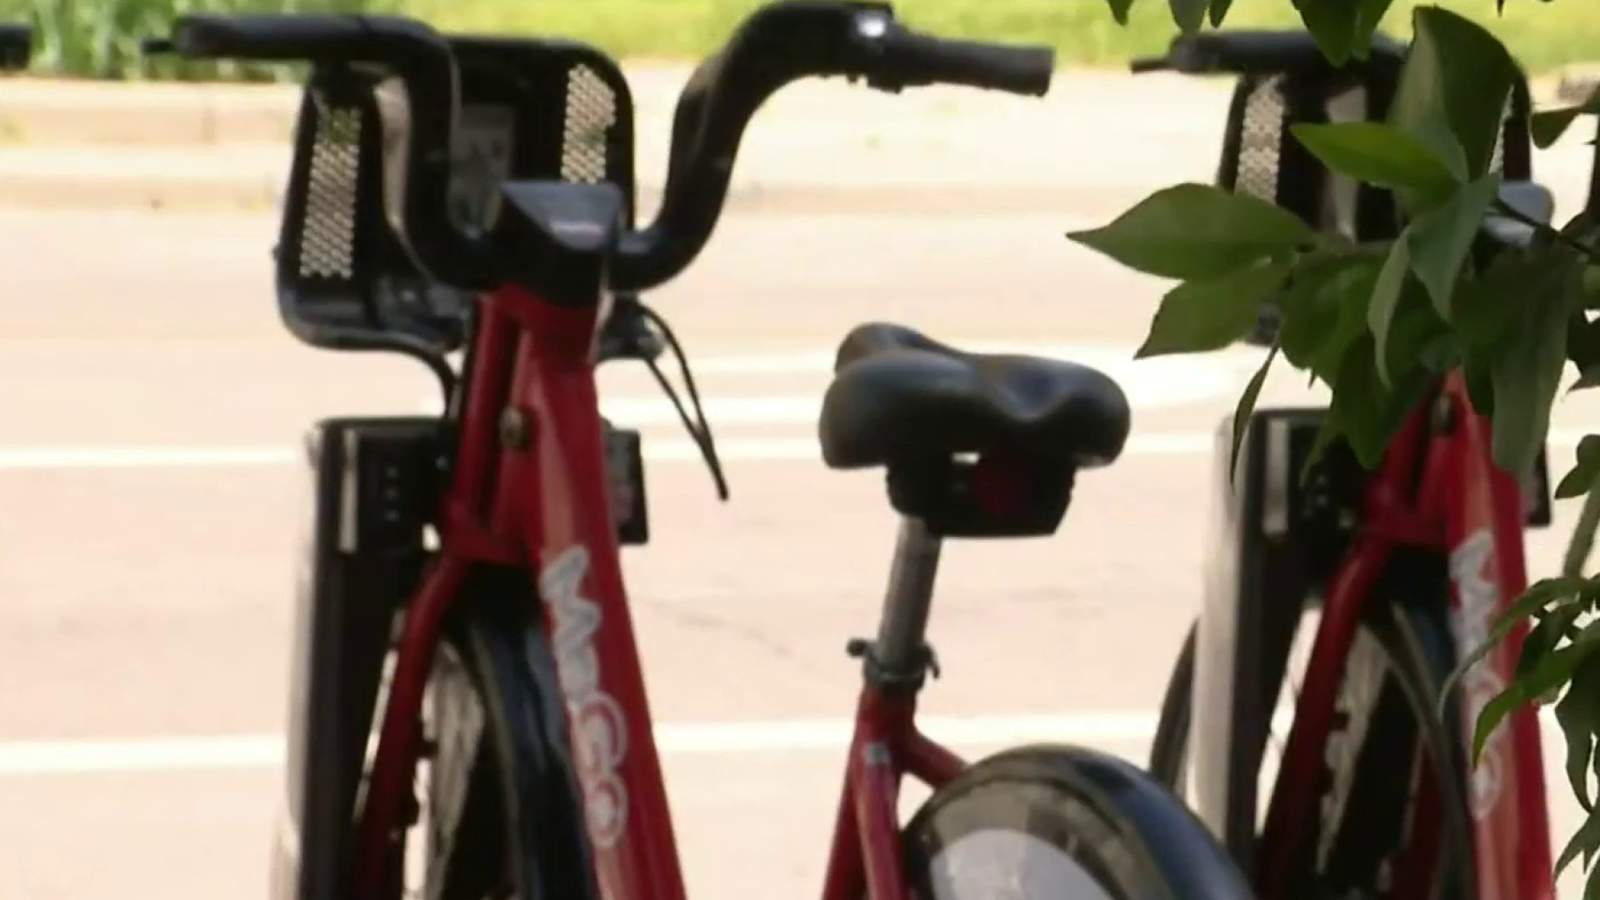 MoGo bike sharing expands in Detroit, southern Oakland County